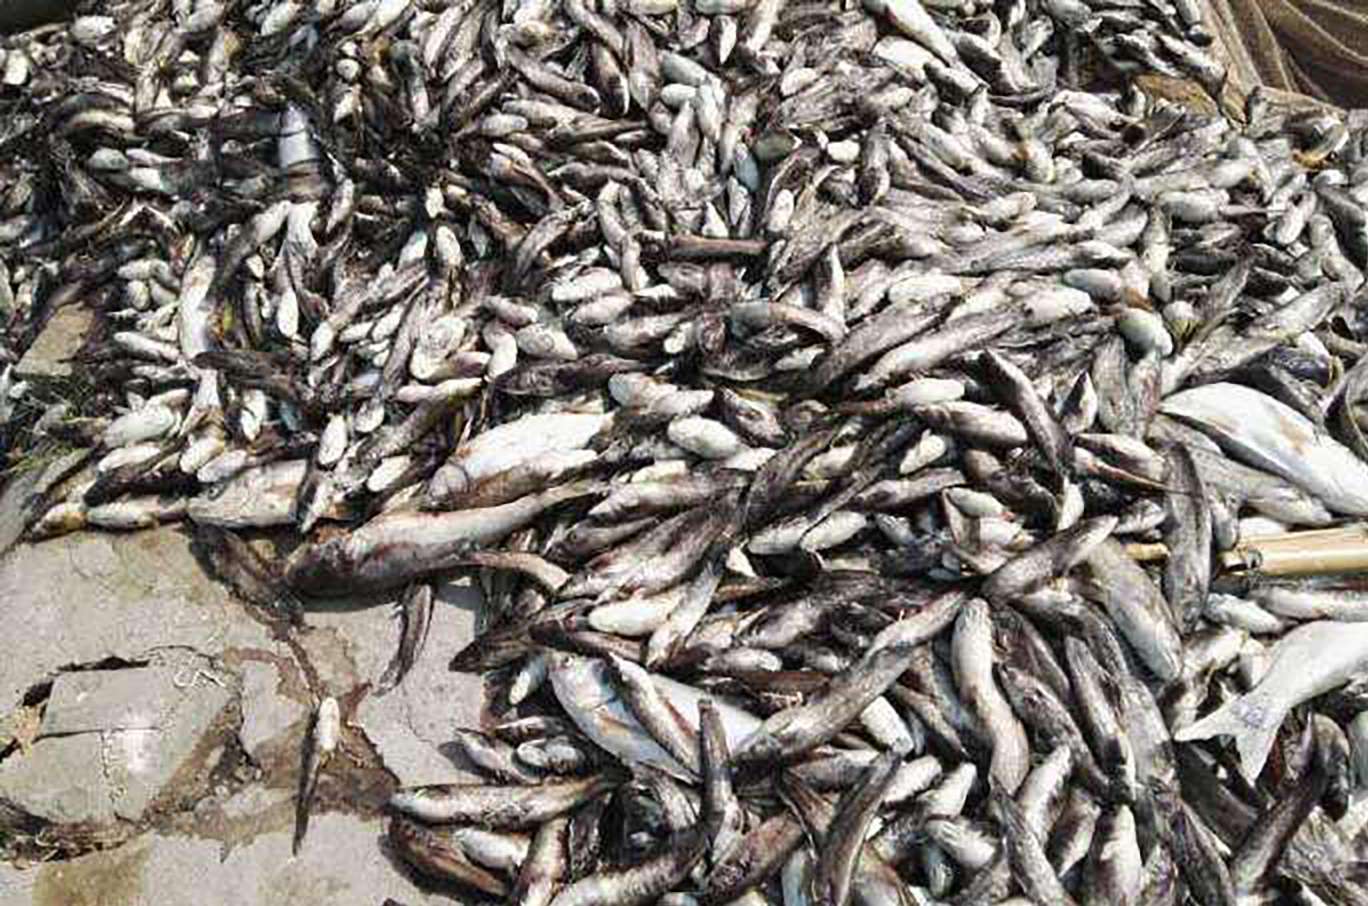 Scalding waters in a fishpond caused the death of tons of fish. Photo: SCMP Pictures